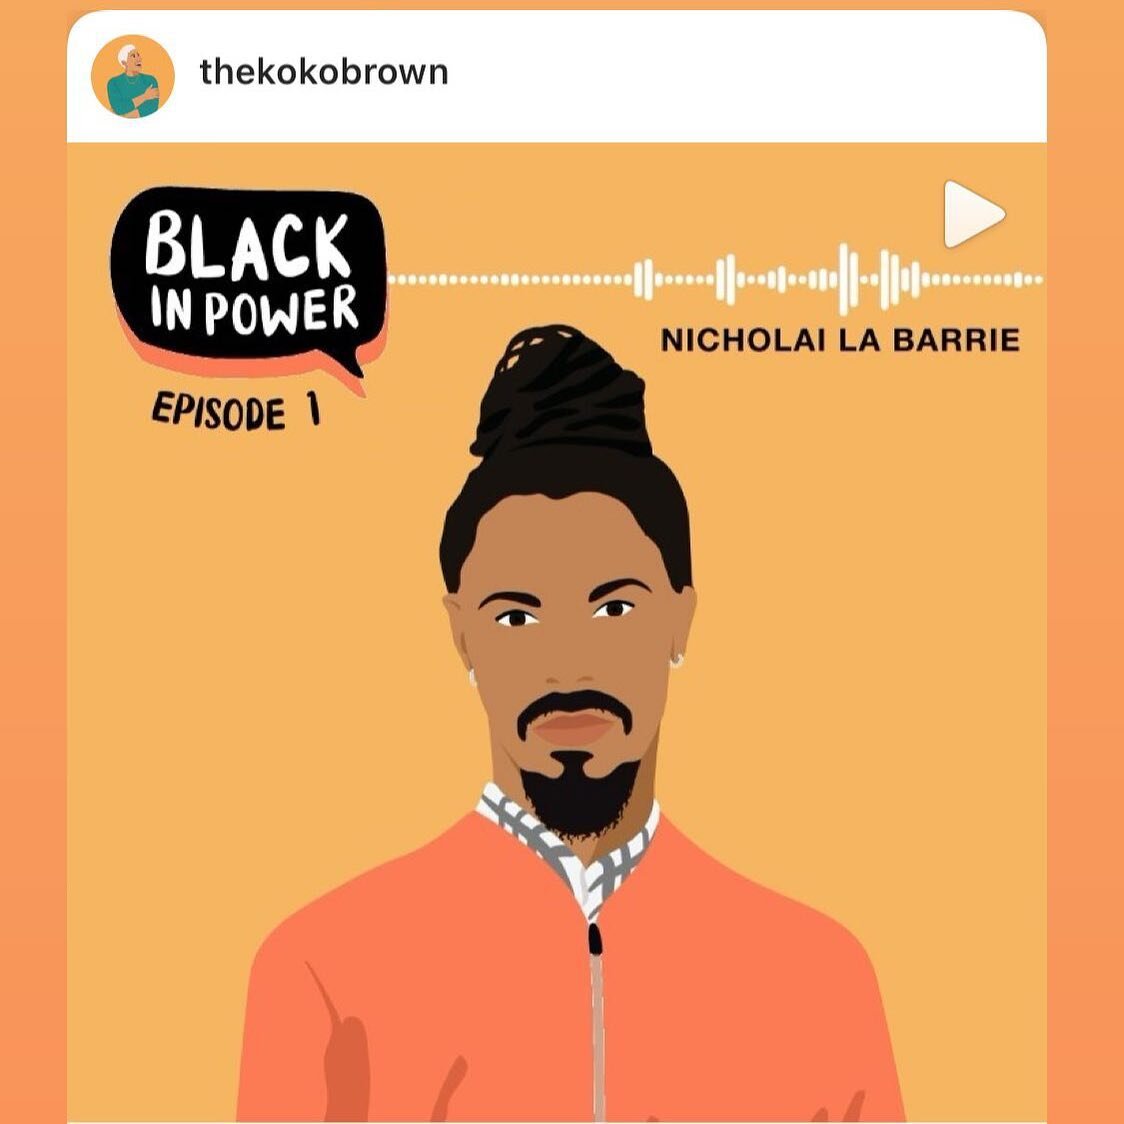 @thekokobrown Black in Power. Had a chat with the wonderful @thekokobrown about all kinds of things. I think we could have gone on for hours. Go check it out. #allthelove